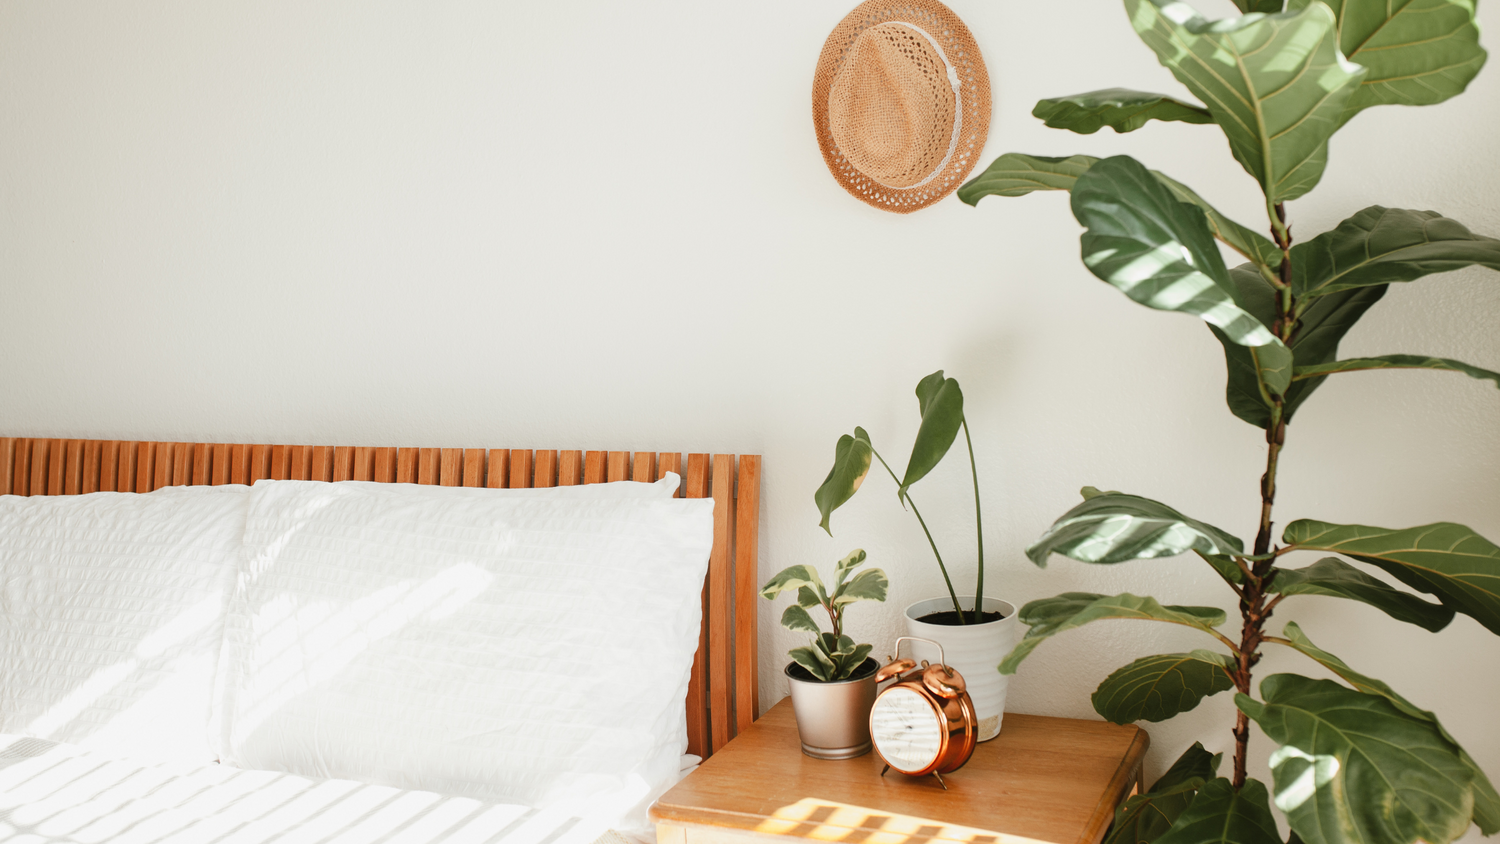 Bed and plants